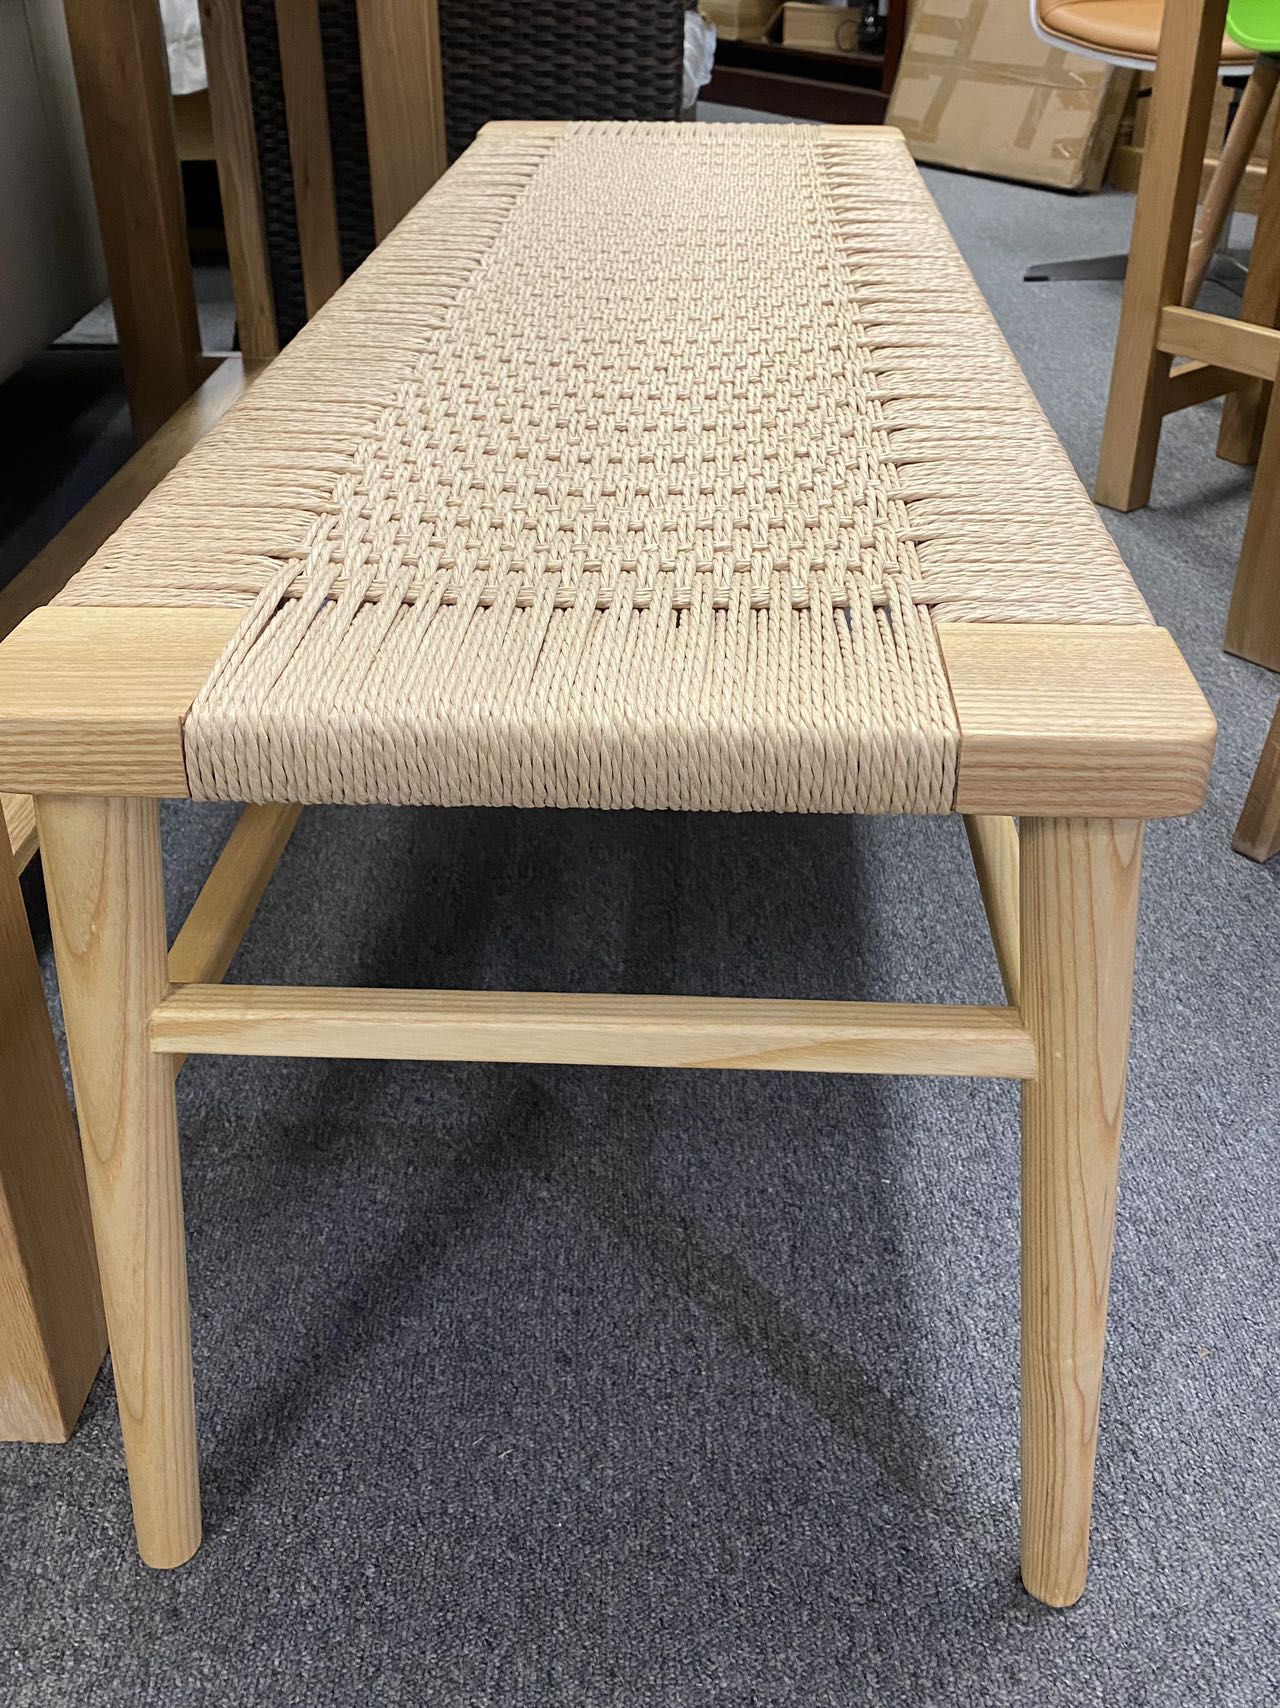 *MG* Replica Wegner Wishbone Bench style 122cm natural color avaliable